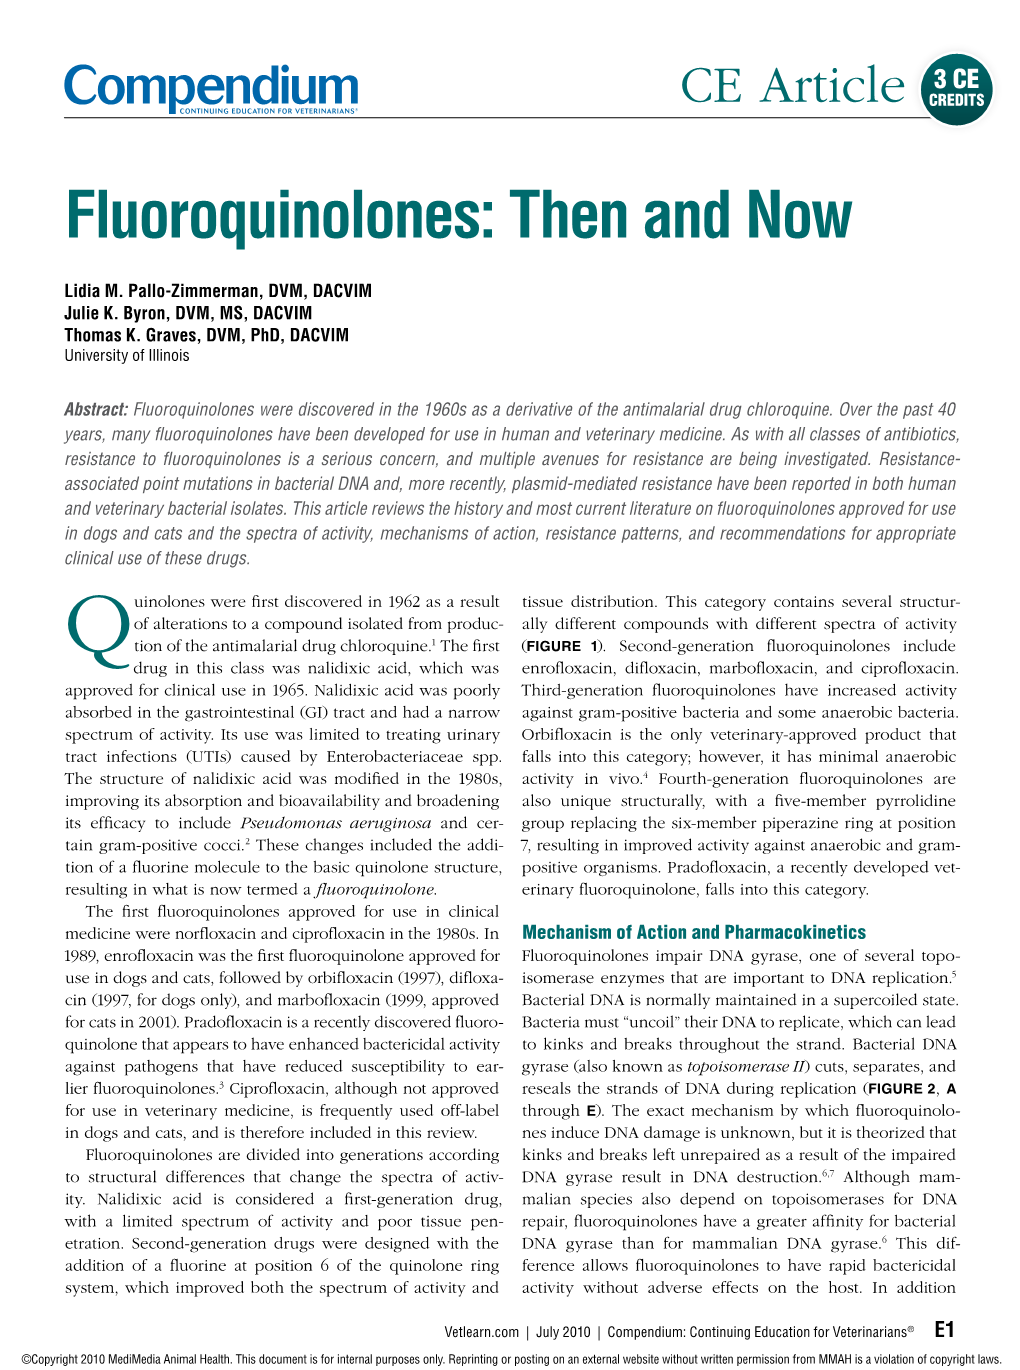 Fluoroquinolones: Then and Now